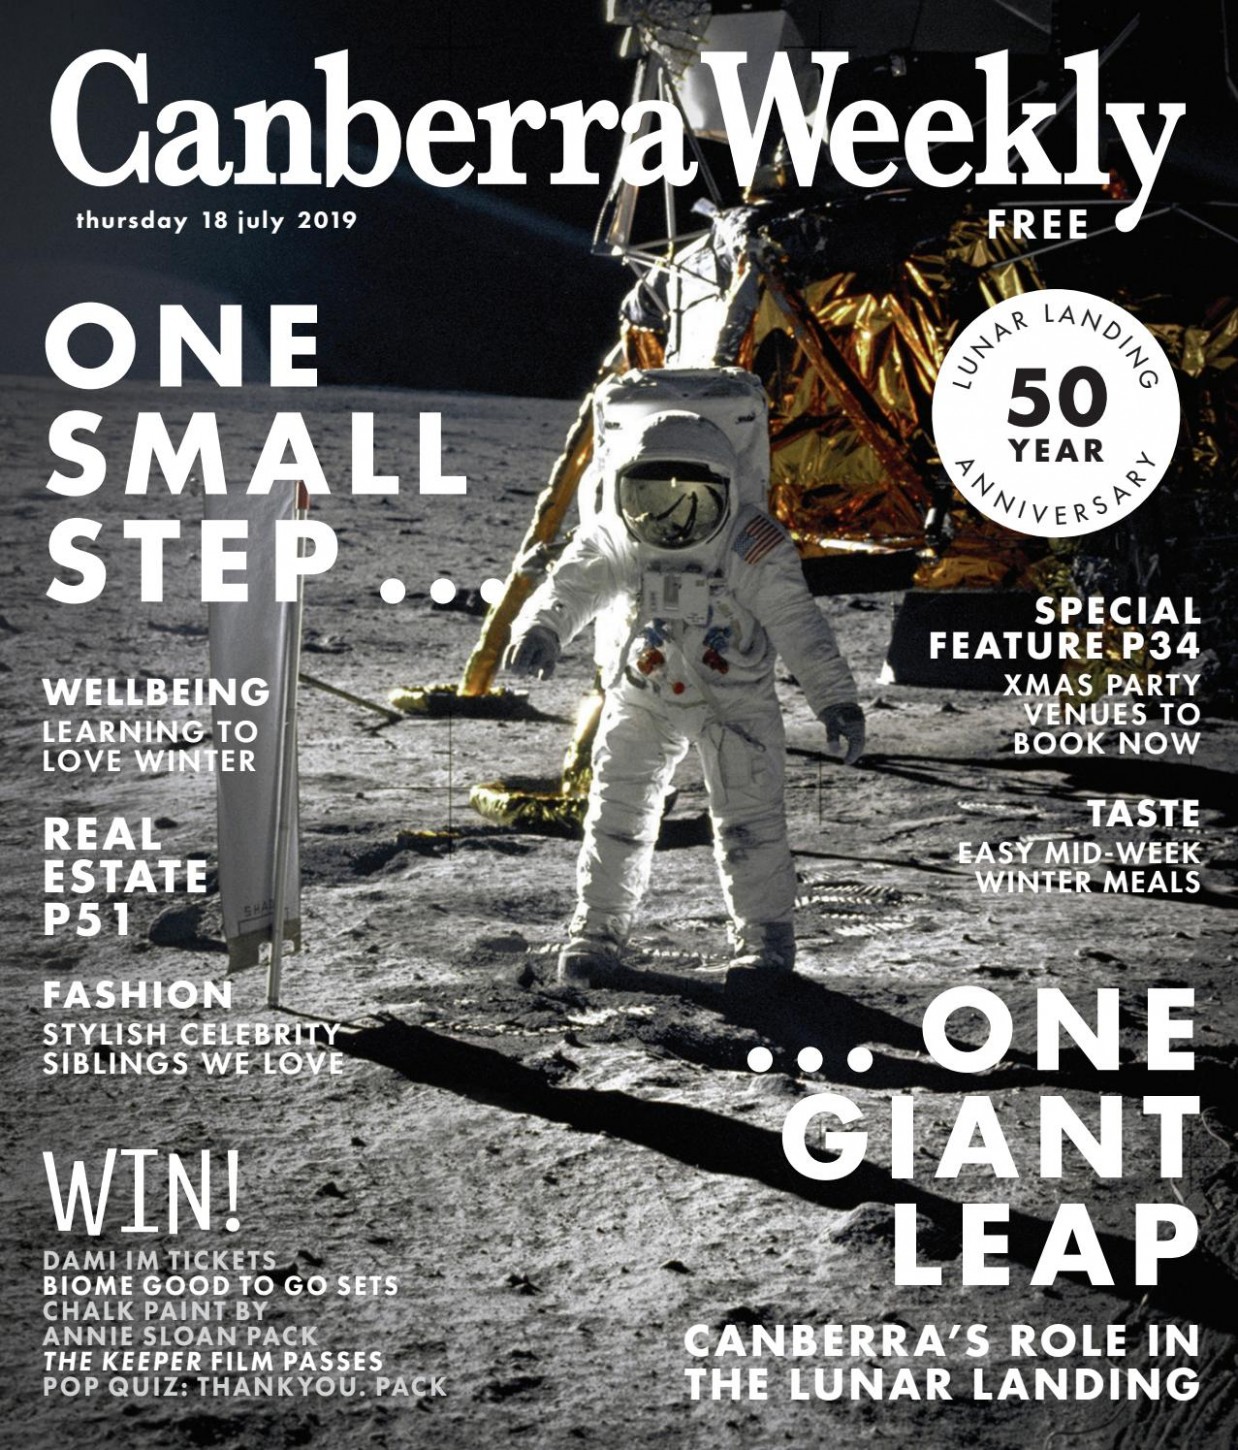 8 July 8 By Canberra Weekly Magazine Issuu Where To Buy Annie Sloan Chalk Paint Houston Tx